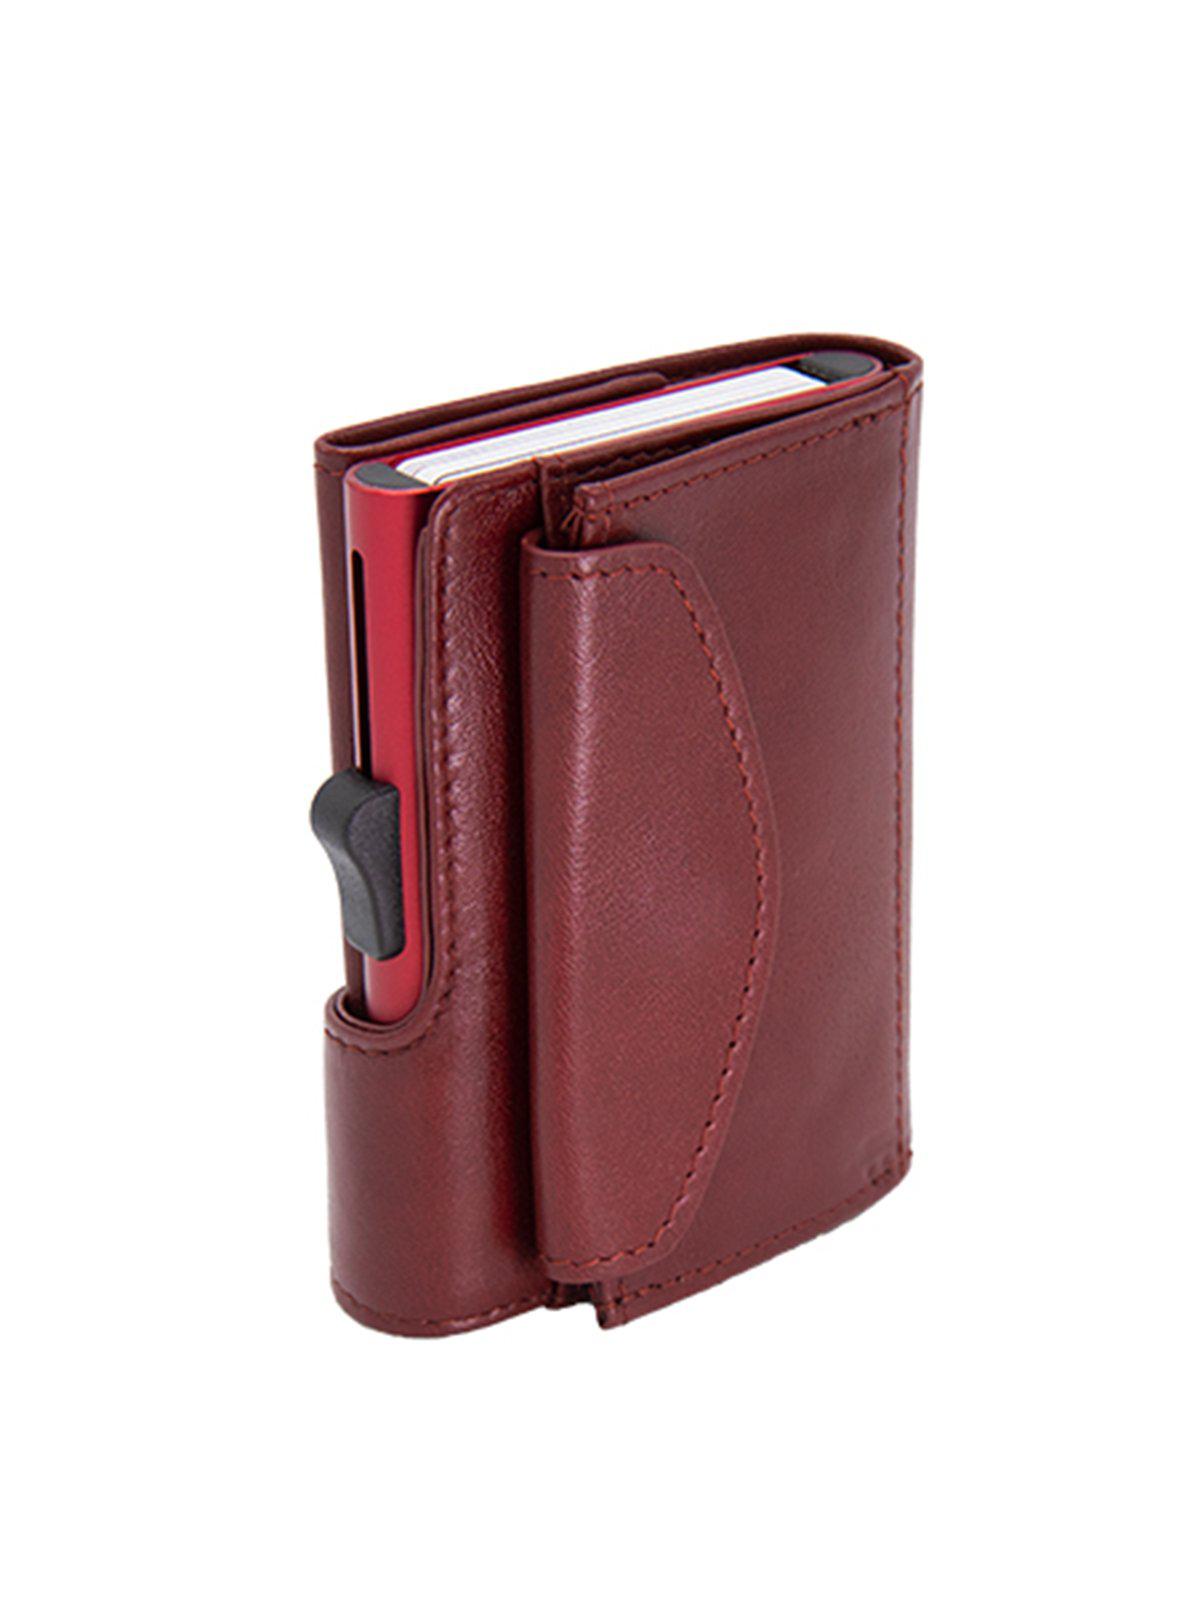 C-Secure XL Italian Leather Wallet with Coin Pouch RFID Red Bordeaux